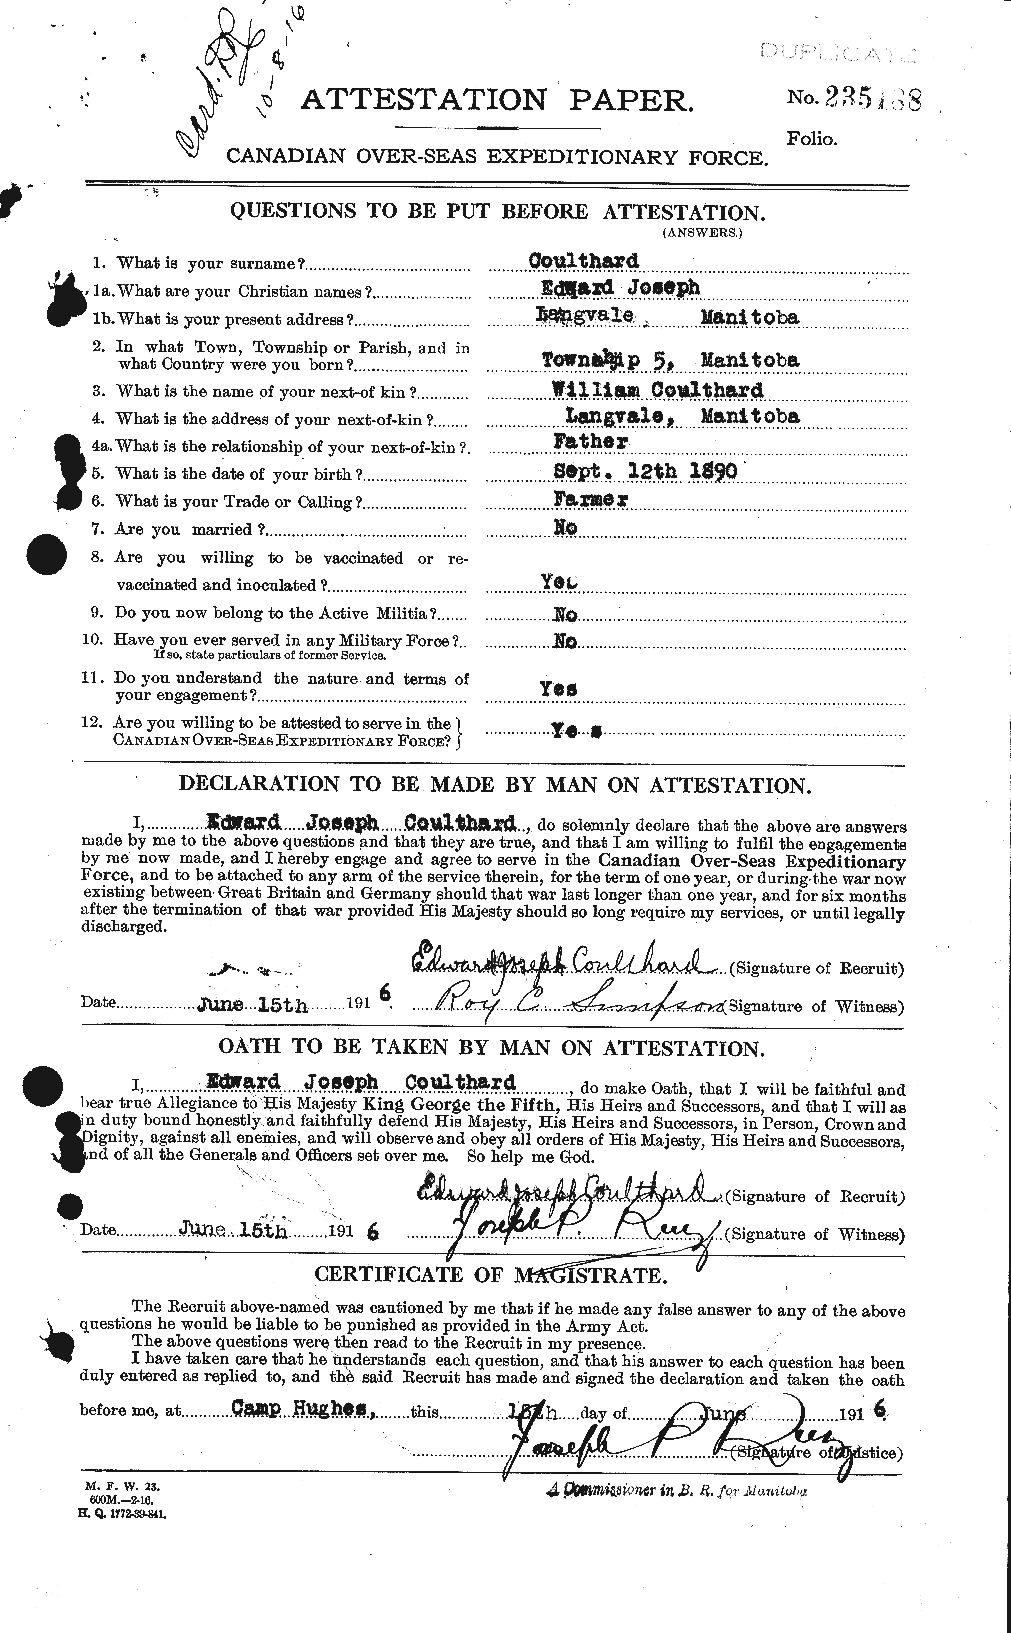 Personnel Records of the First World War - CEF 058108a